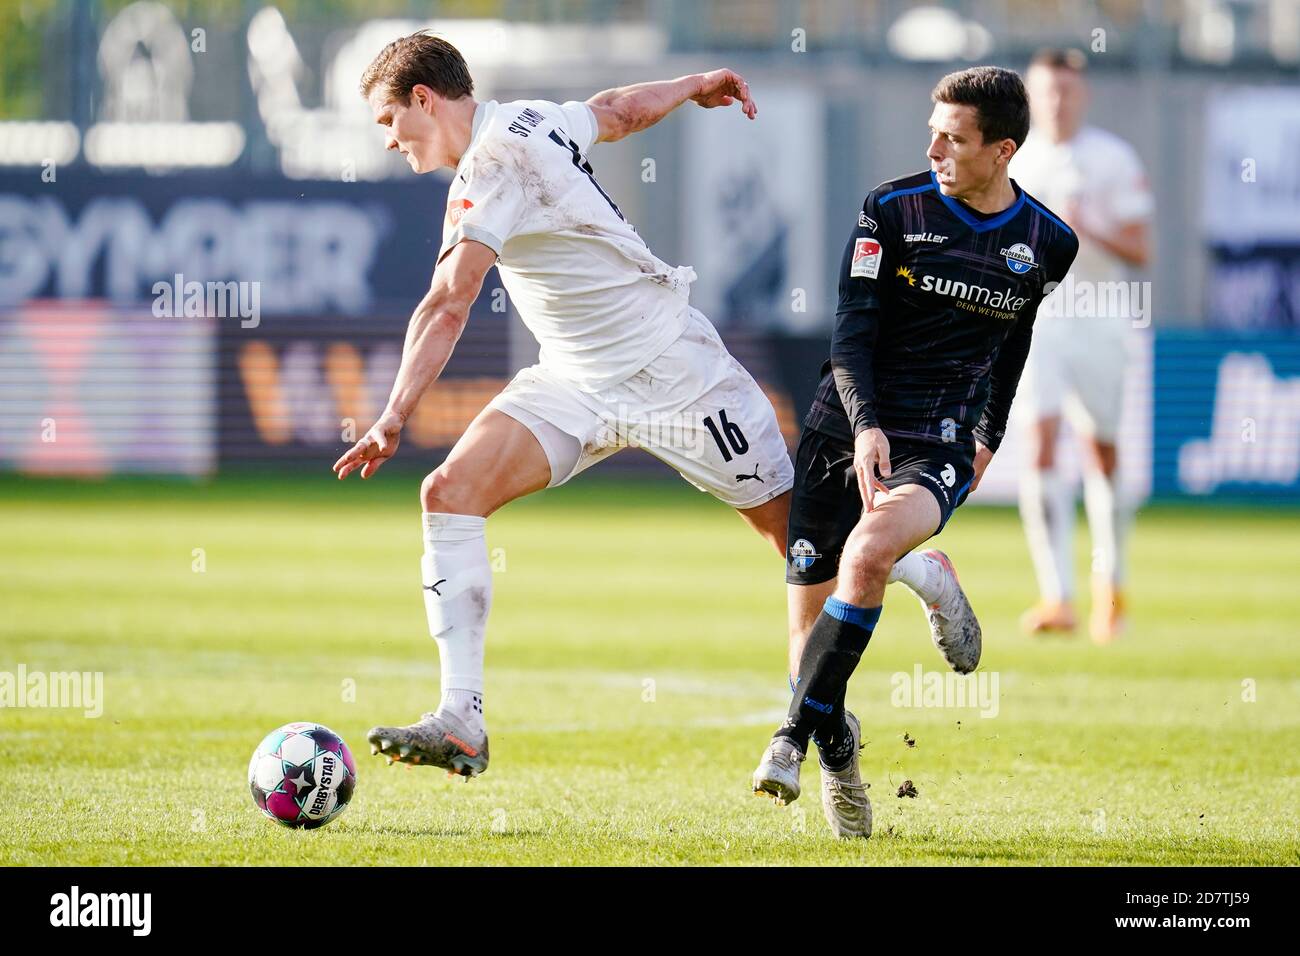 Sandhausen, Germany. 25th Oct, 2020. Football: 2nd Bundesliga, SV Sandhausen - SC Paderborn 07, 5th matchday, at the Hardtwaldstadion. Sandhausen's Kevin Behrens (l) and Paderborn's Ron Schallenberg fight for the ball. Credit: Uwe Anspach/dpa - IMPORTANT NOTE: In accordance with the regulations of the DFL Deutsche Fußball Liga and the DFB Deutscher Fußball-Bund, it is prohibited to exploit or have exploited in the stadium and/or from the game taken photographs in the form of sequence images and/or video-like photo series./dpa/Alamy Live News Stock Photo